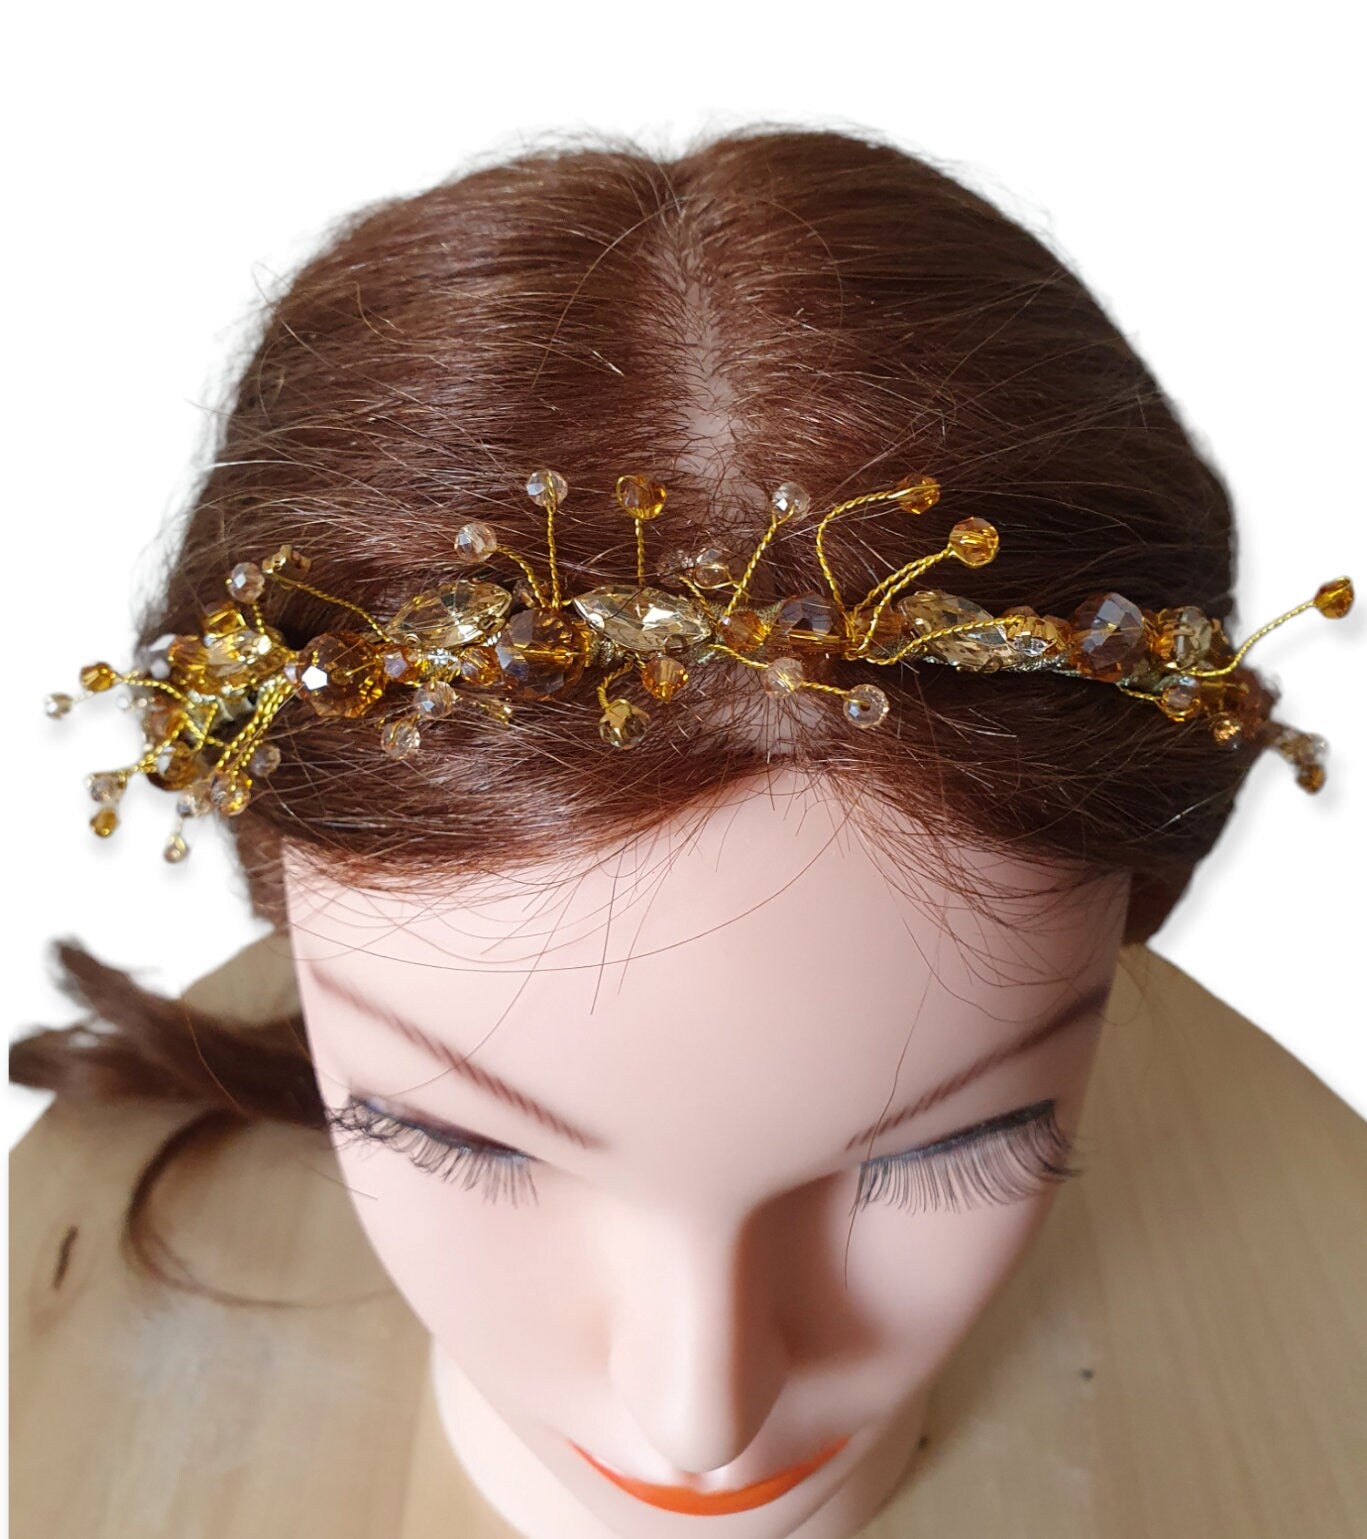 Handmade women's headband with plastic pearls, tiara, bridal diadem, hair accessories, guest tiara, special for events